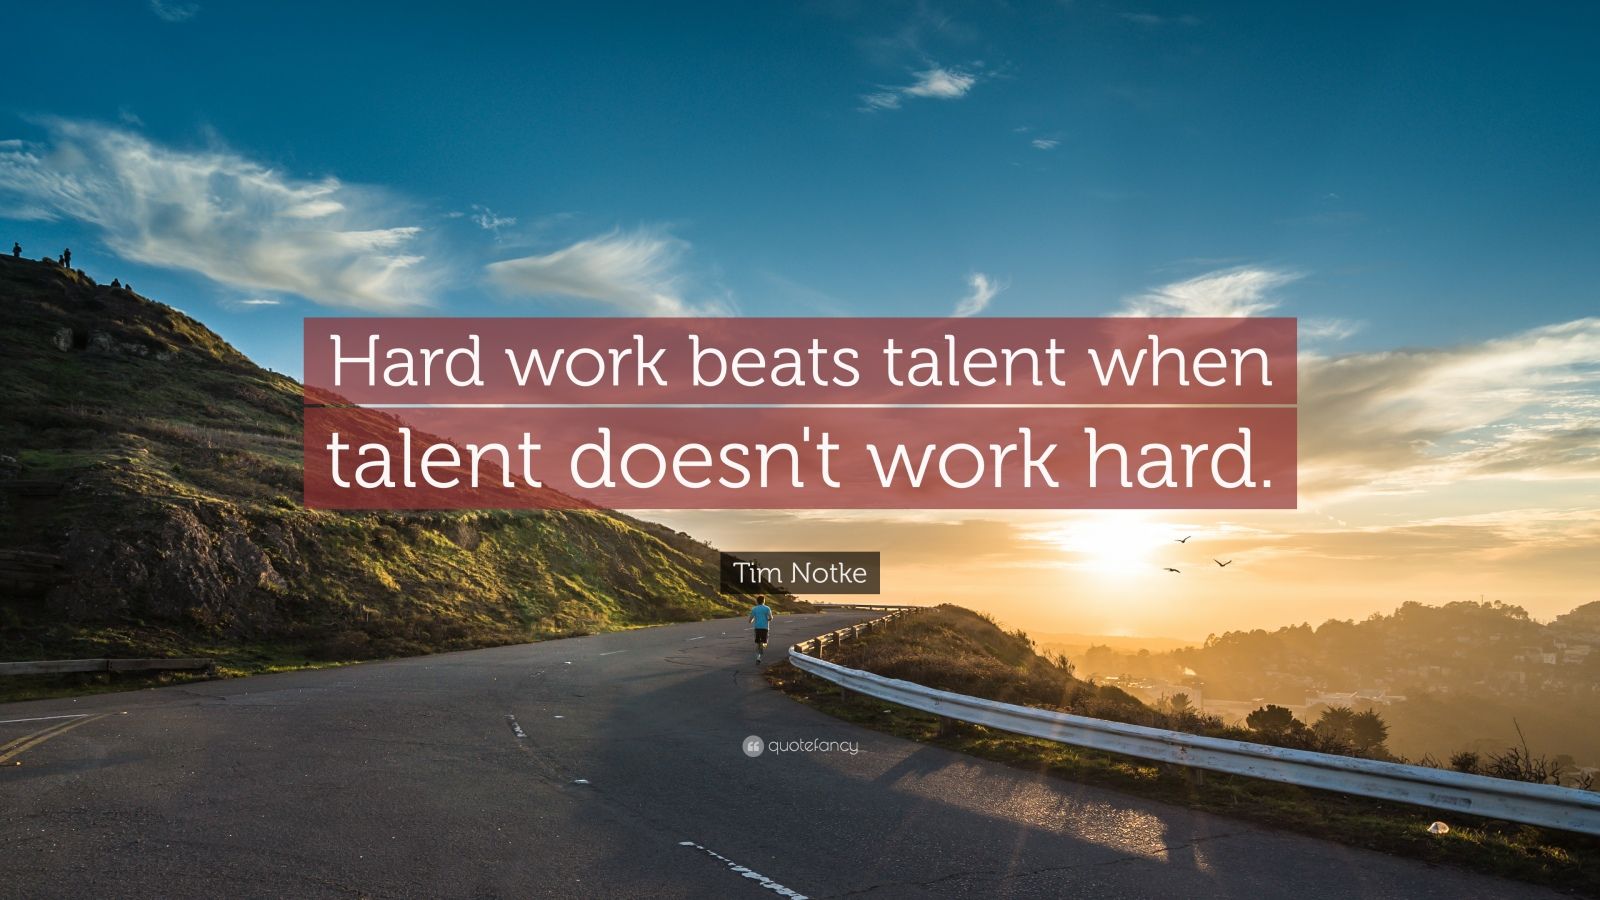 Motivational Quotes: “Hard work beats talent when talent doesn't work hard.” — Tim Notke